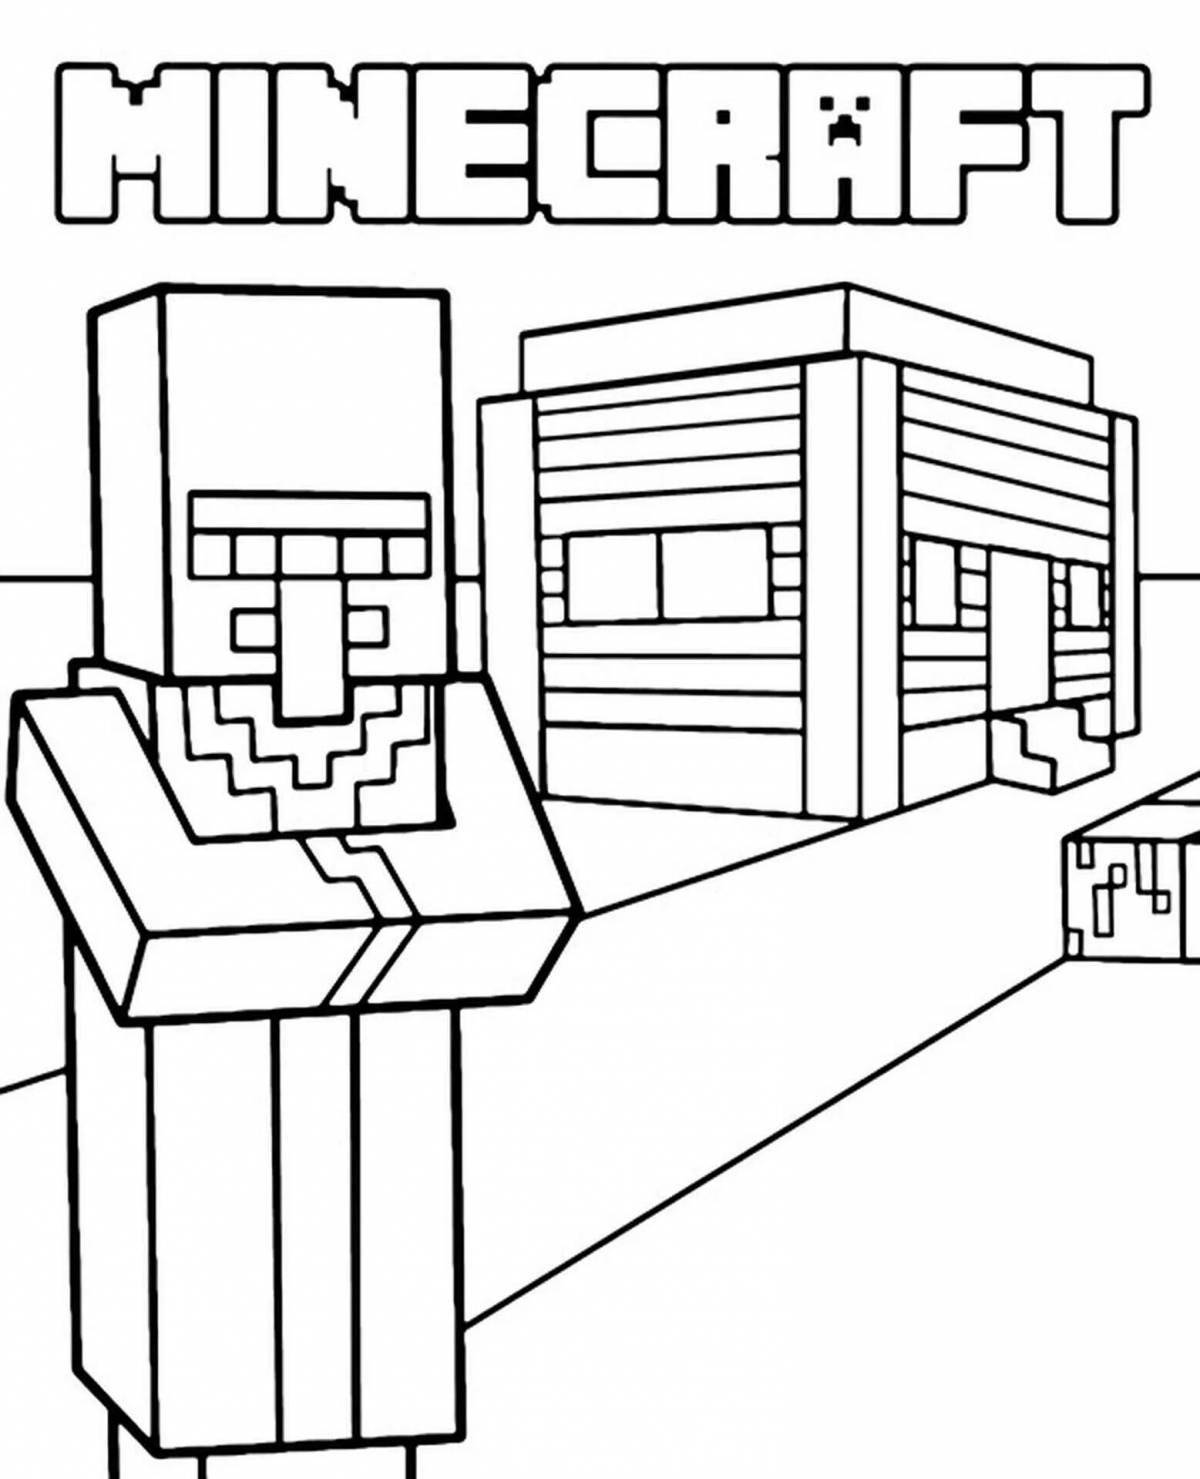 Coloring page with colorful minecraft logo